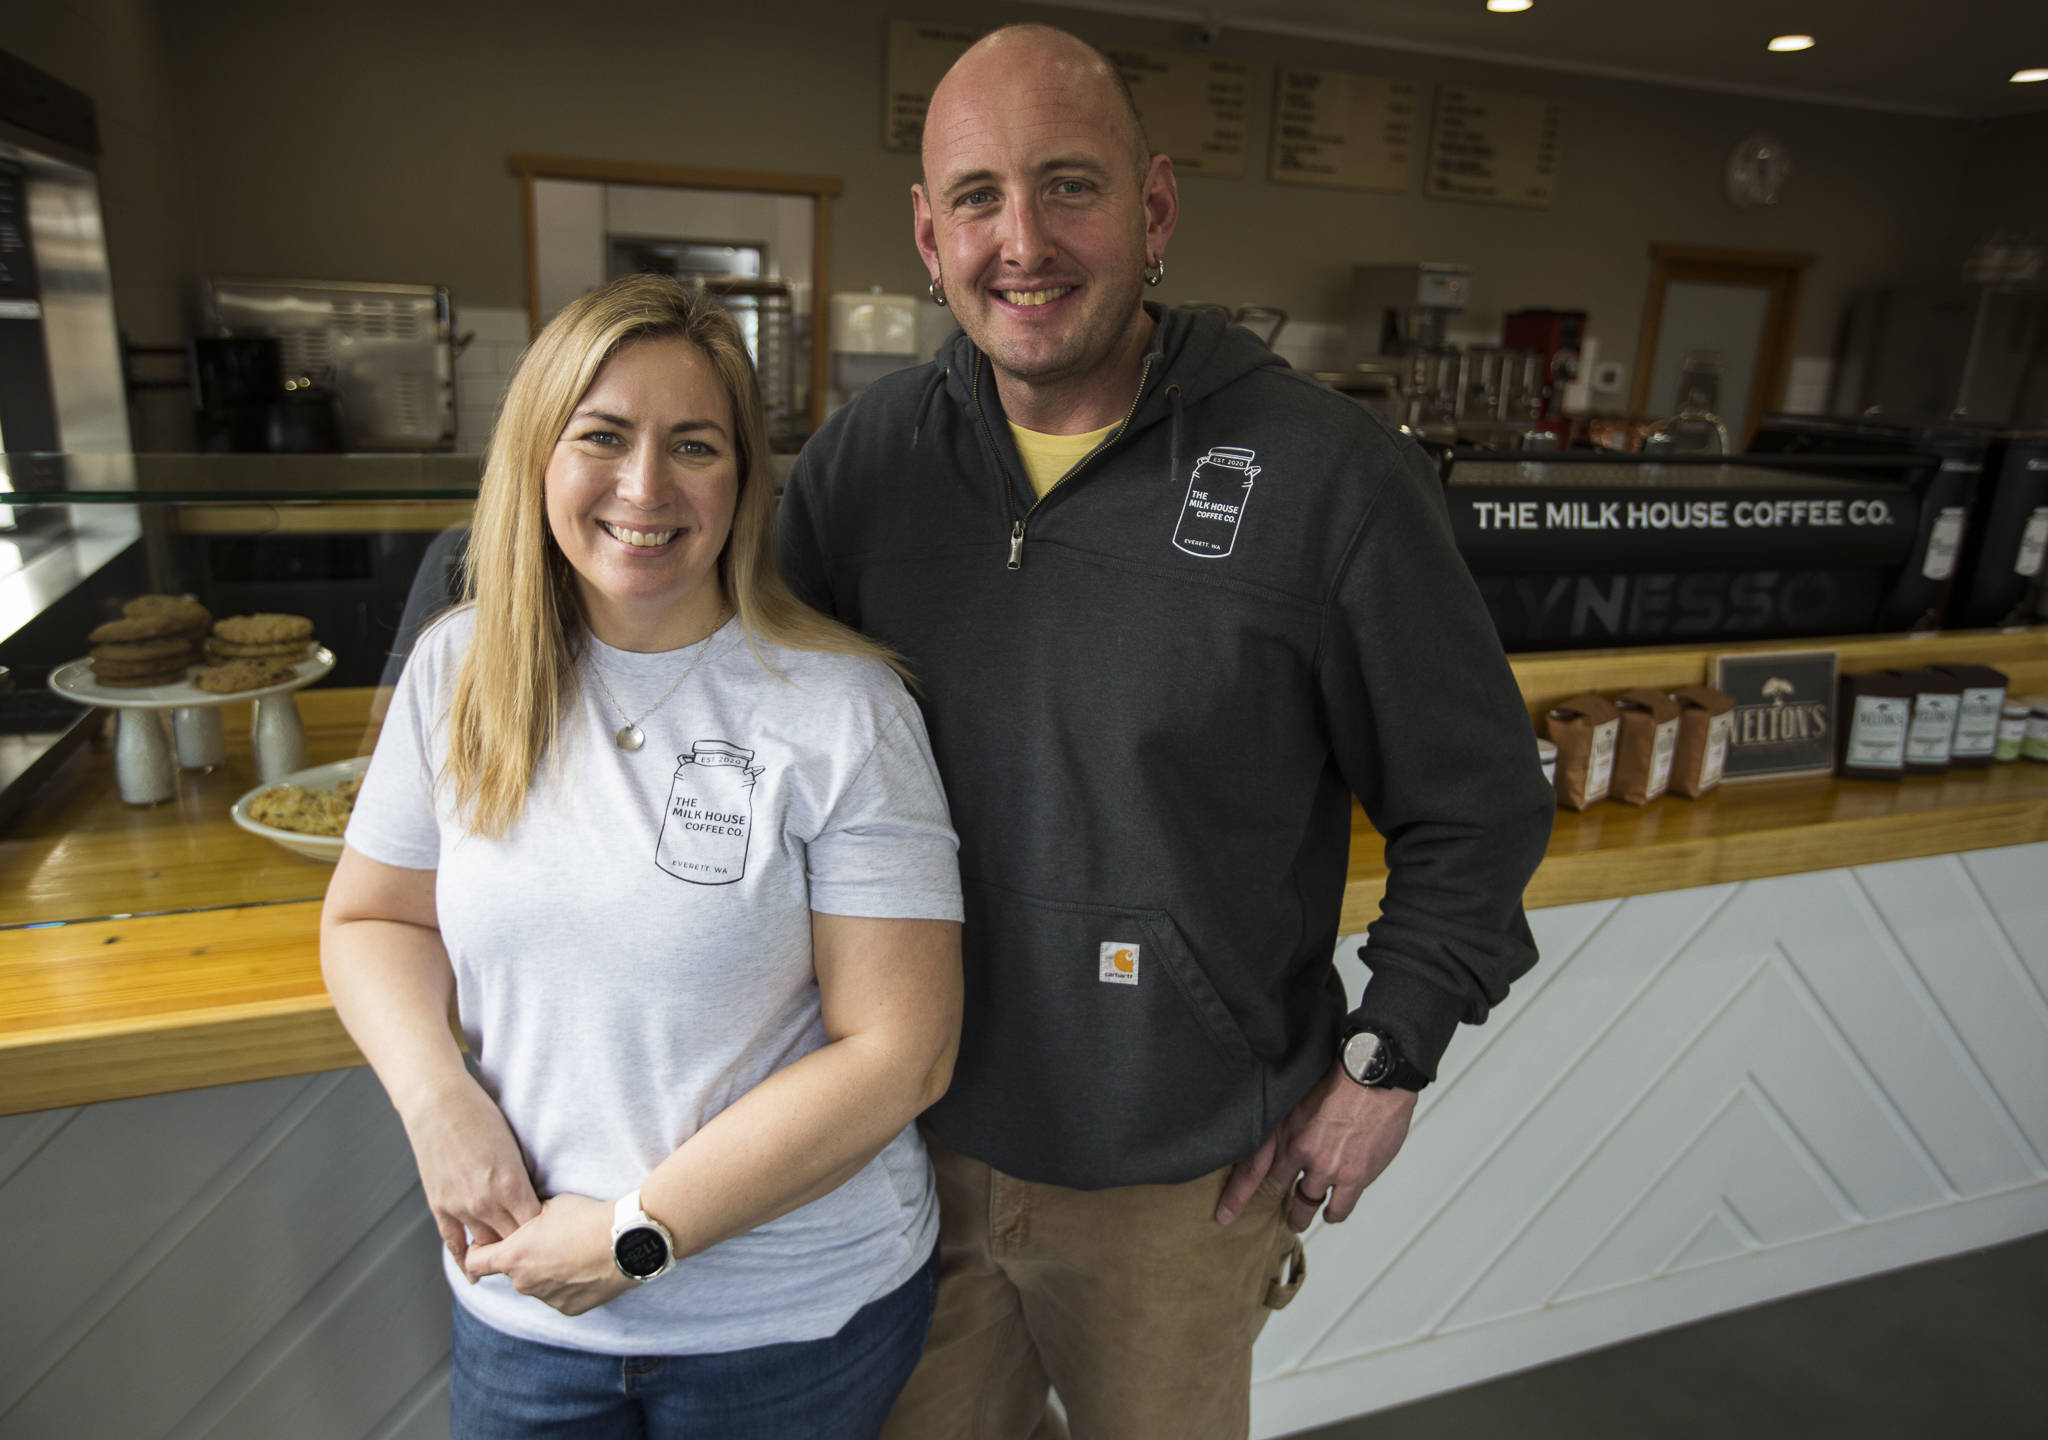 Heather and Michael Wallace, owners of the Milk House Coffee Co. on Thursday in Everett. (Olivia Vanni / The Herald)